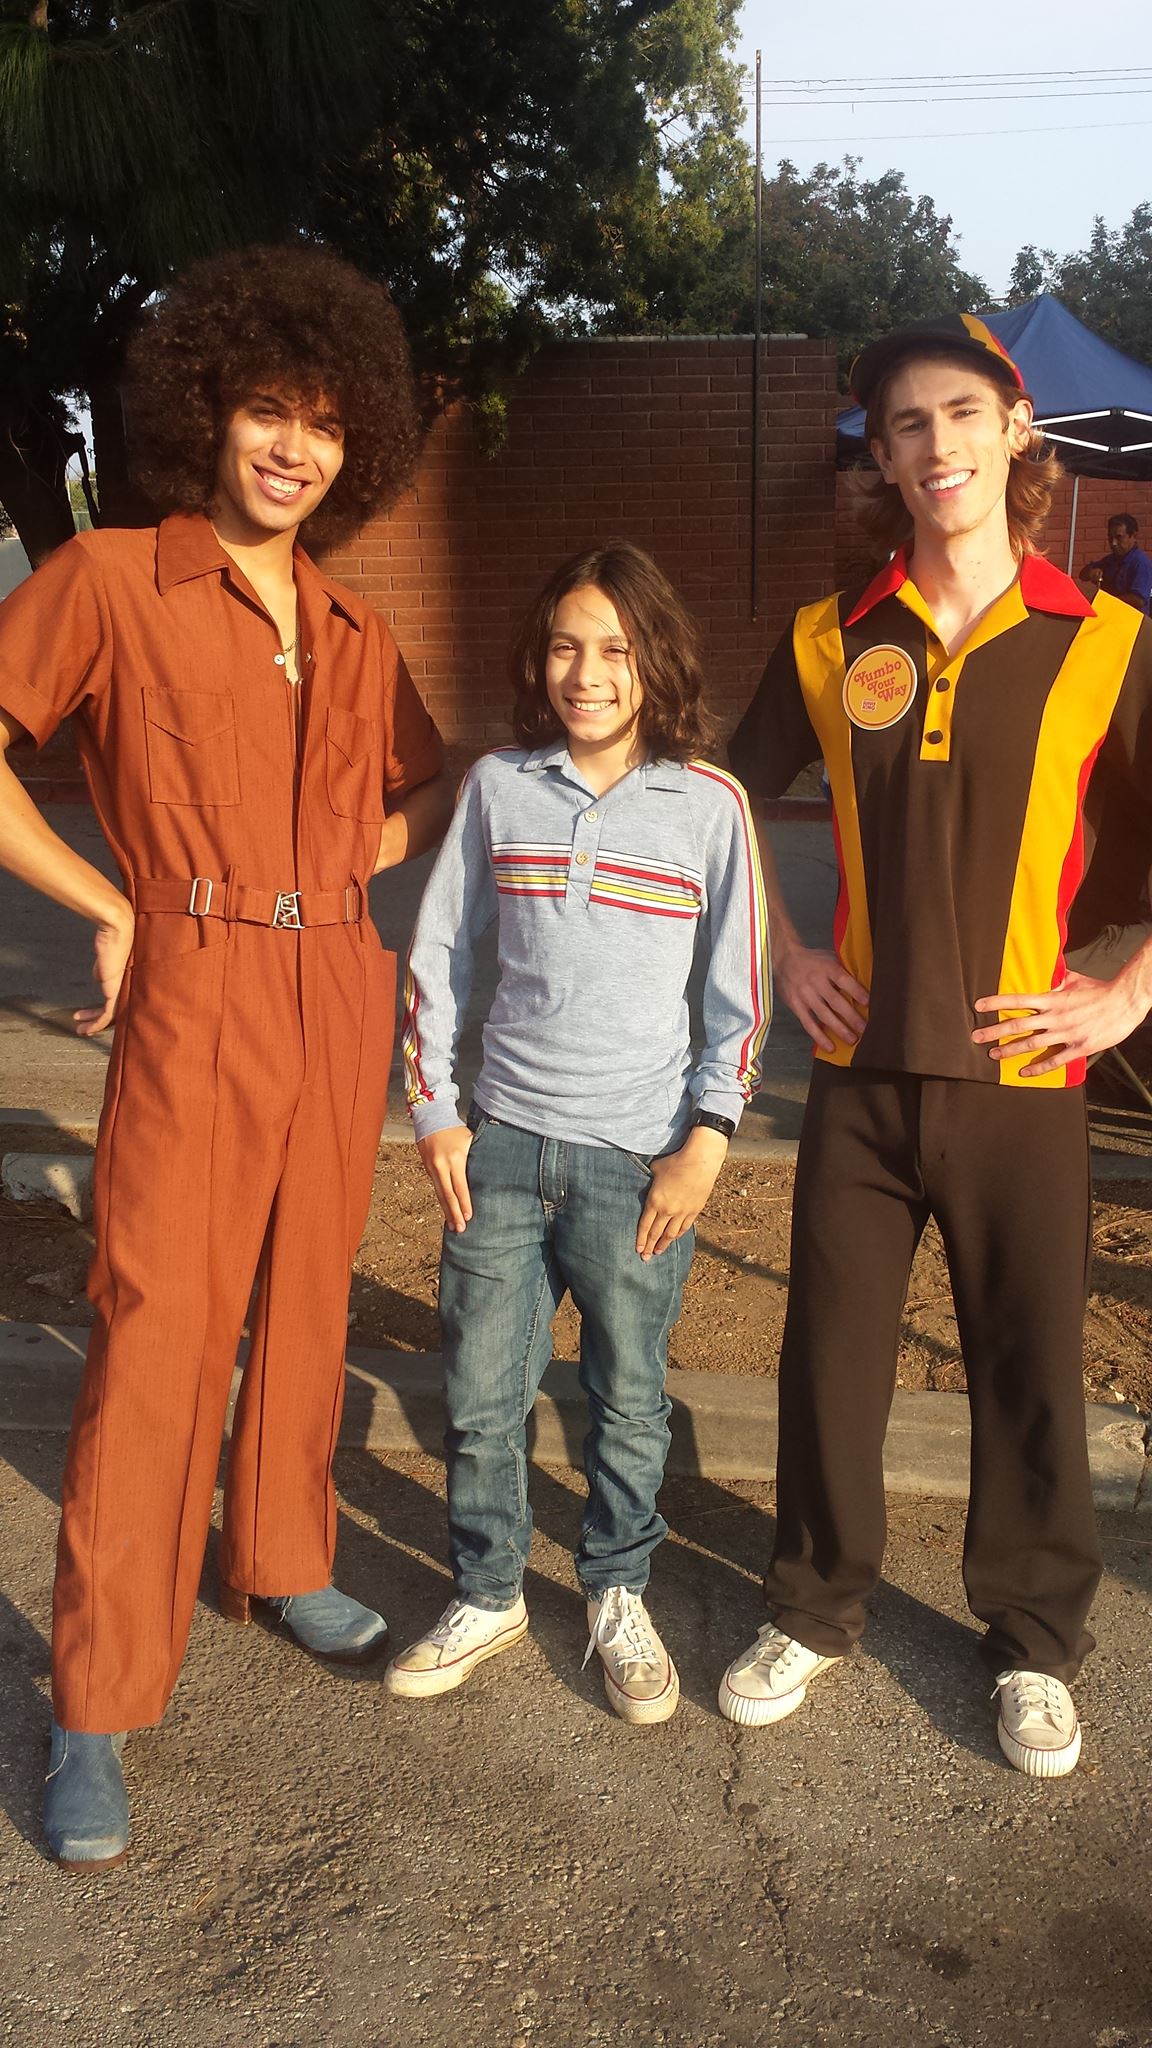 On set of a Burger King (1970s style) commercial (November 2014)